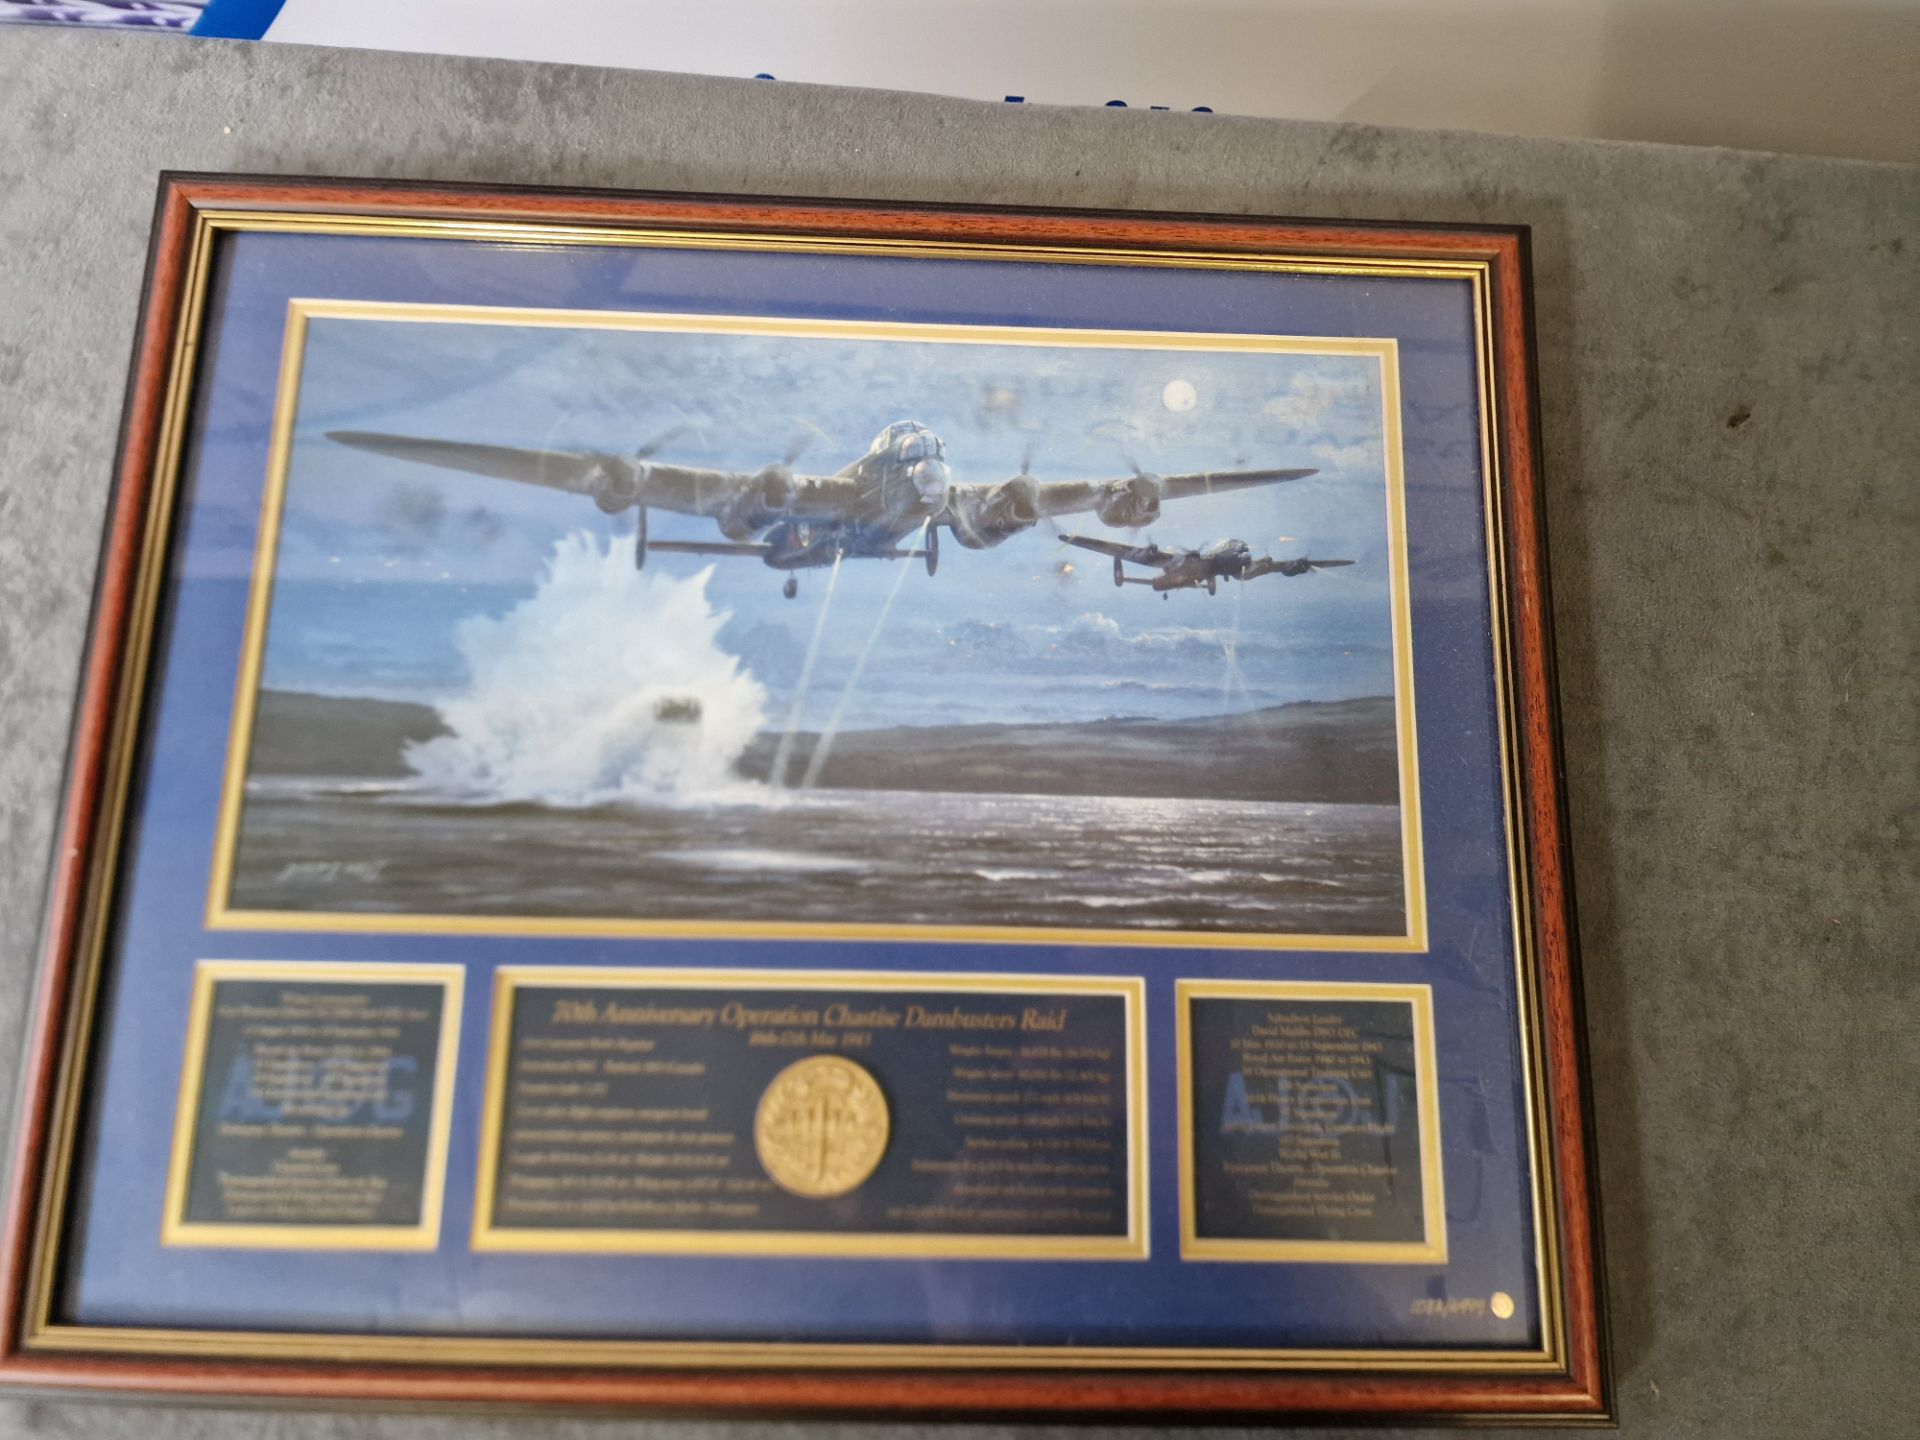 Lancaster Dambusters Commemorative Print Limited To 4999 Editions With Artwork By Philip West. The - Bild 3 aus 8